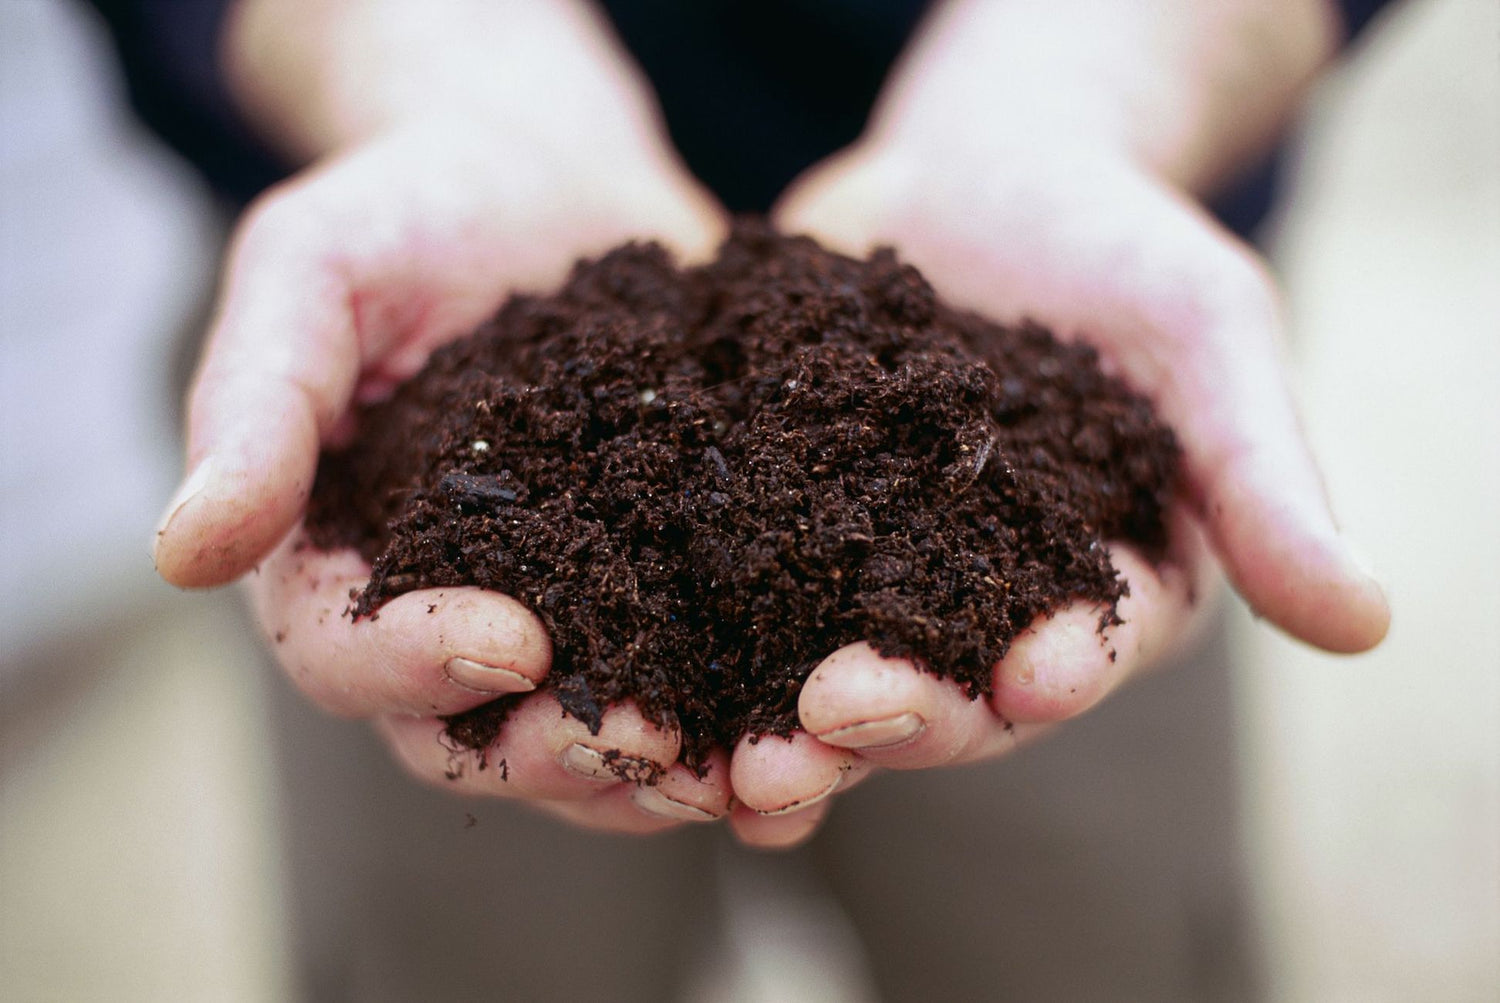 Too Good to Waste: 4 Tips to Up Your Compost Game